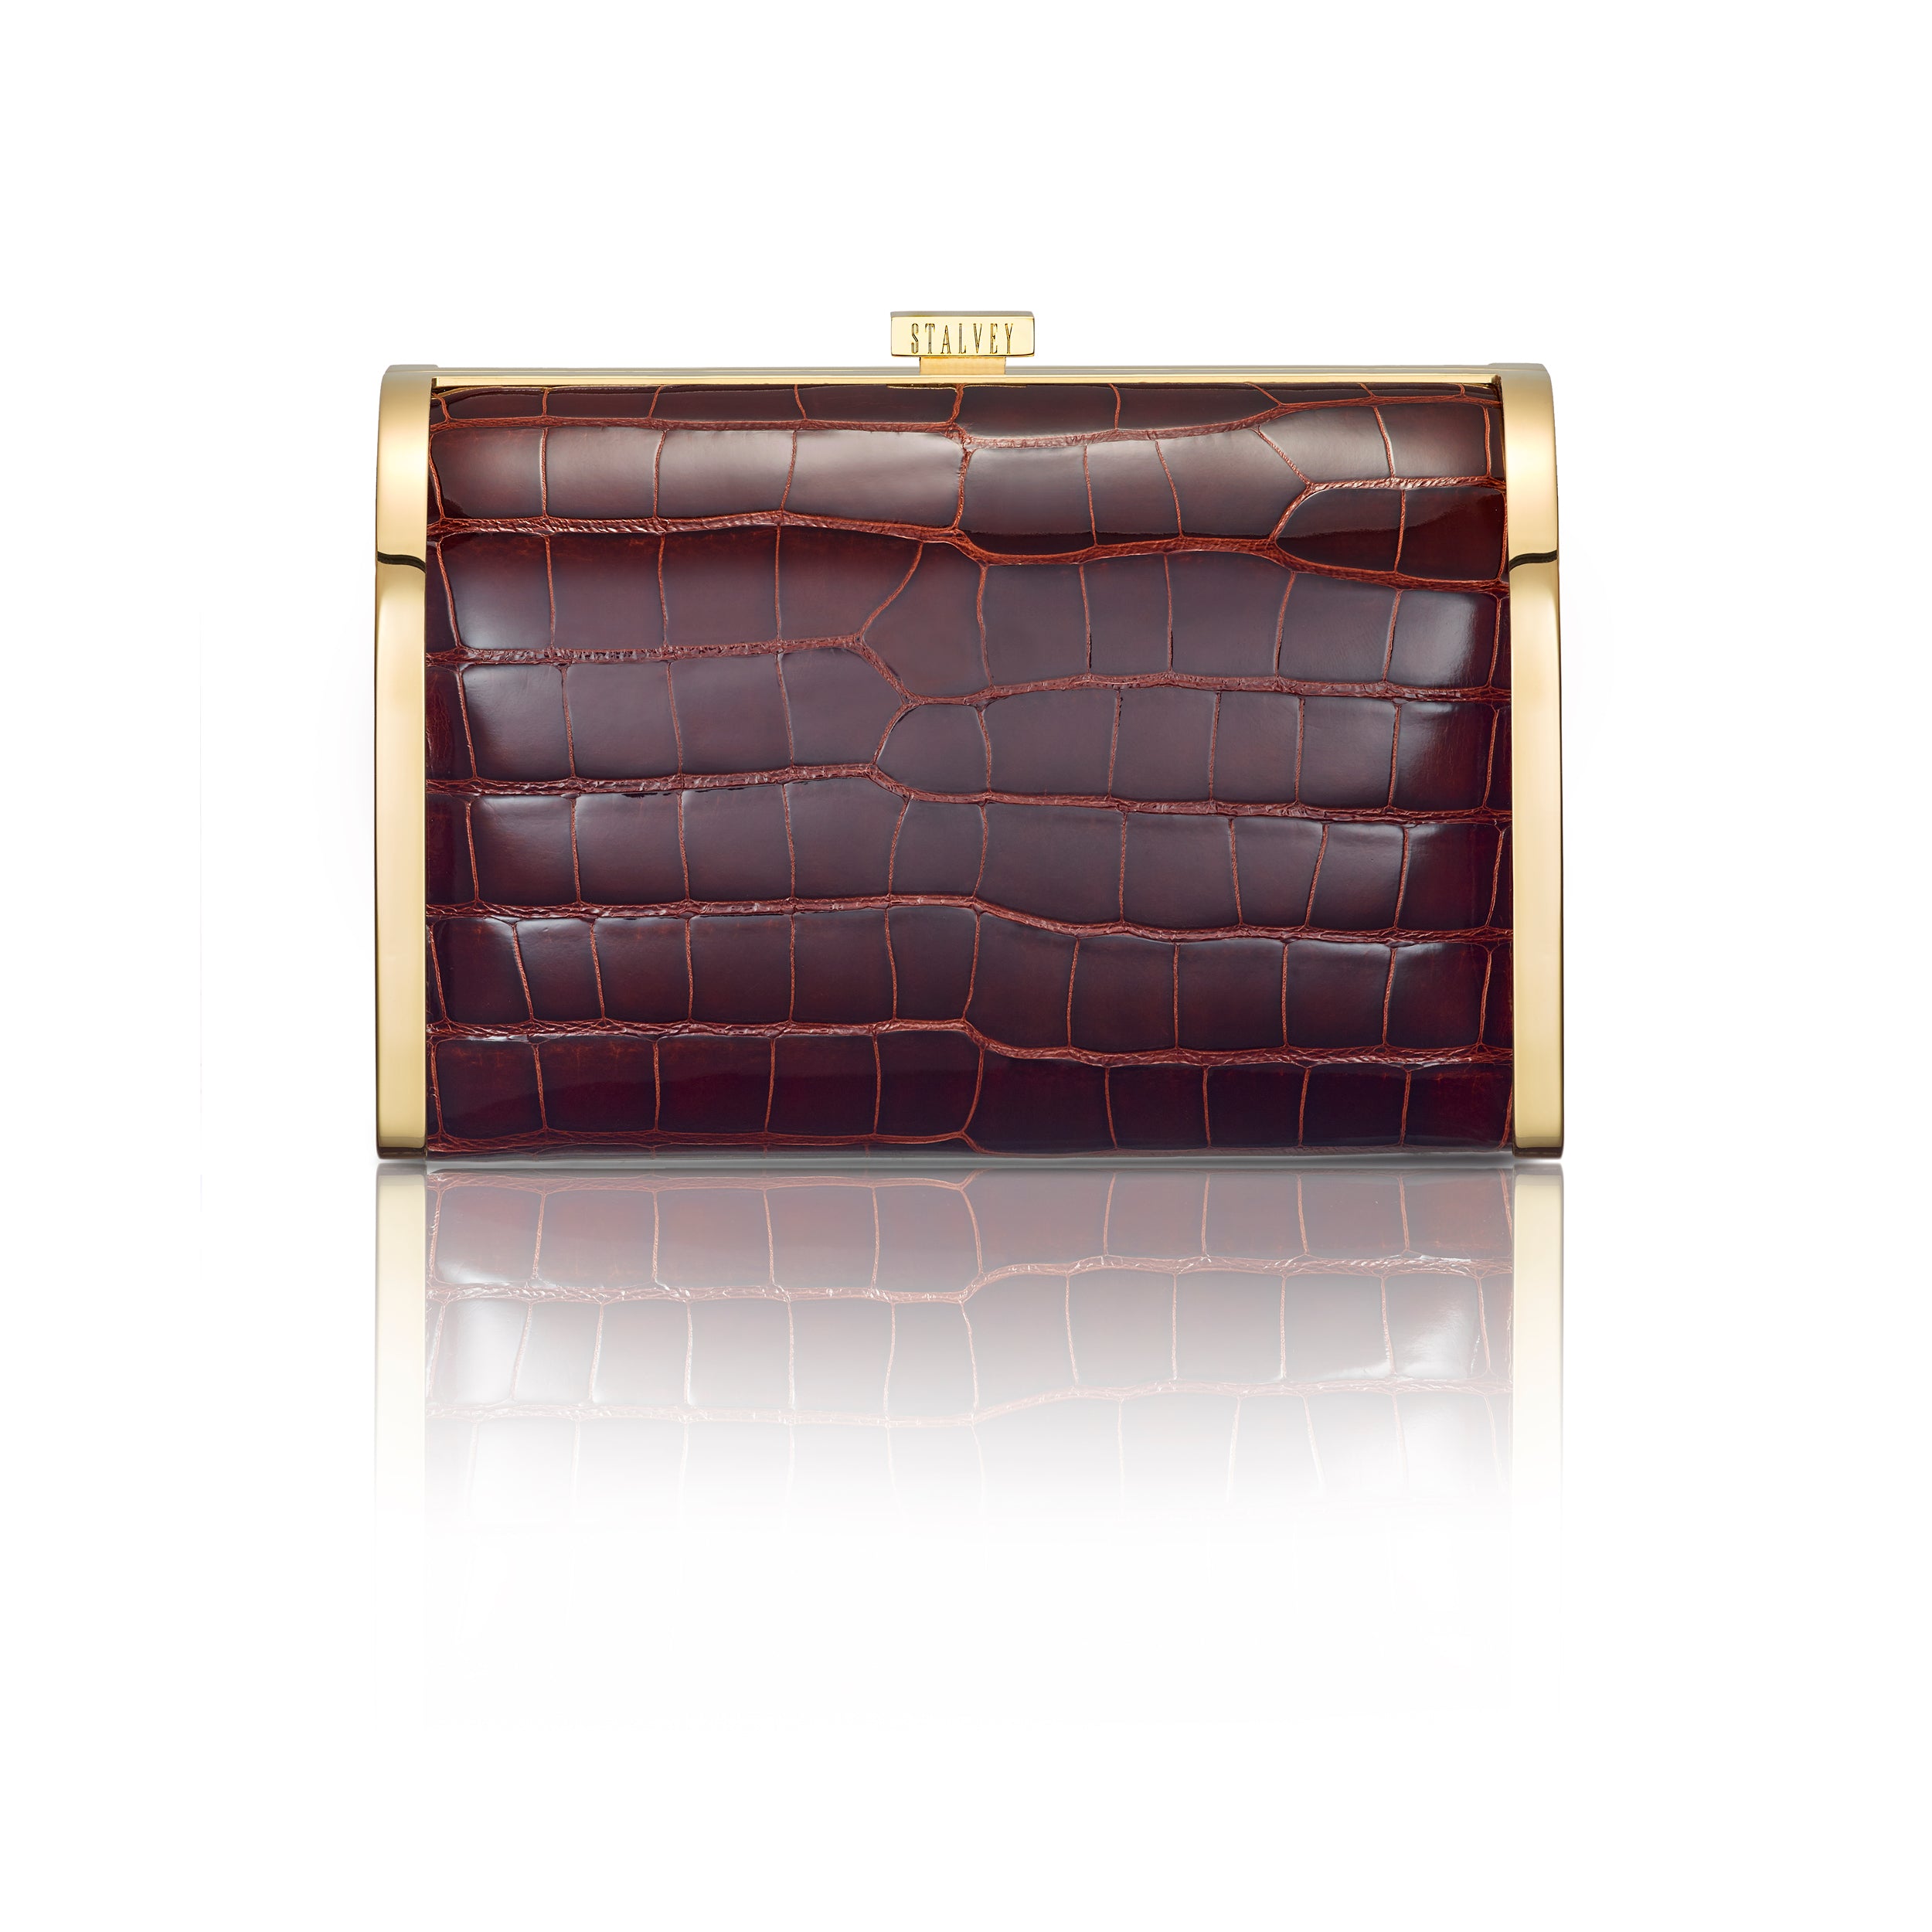 STALVEY Rounded Clutch in Burgundy Alligator with 24kt Gold Hardware Front View